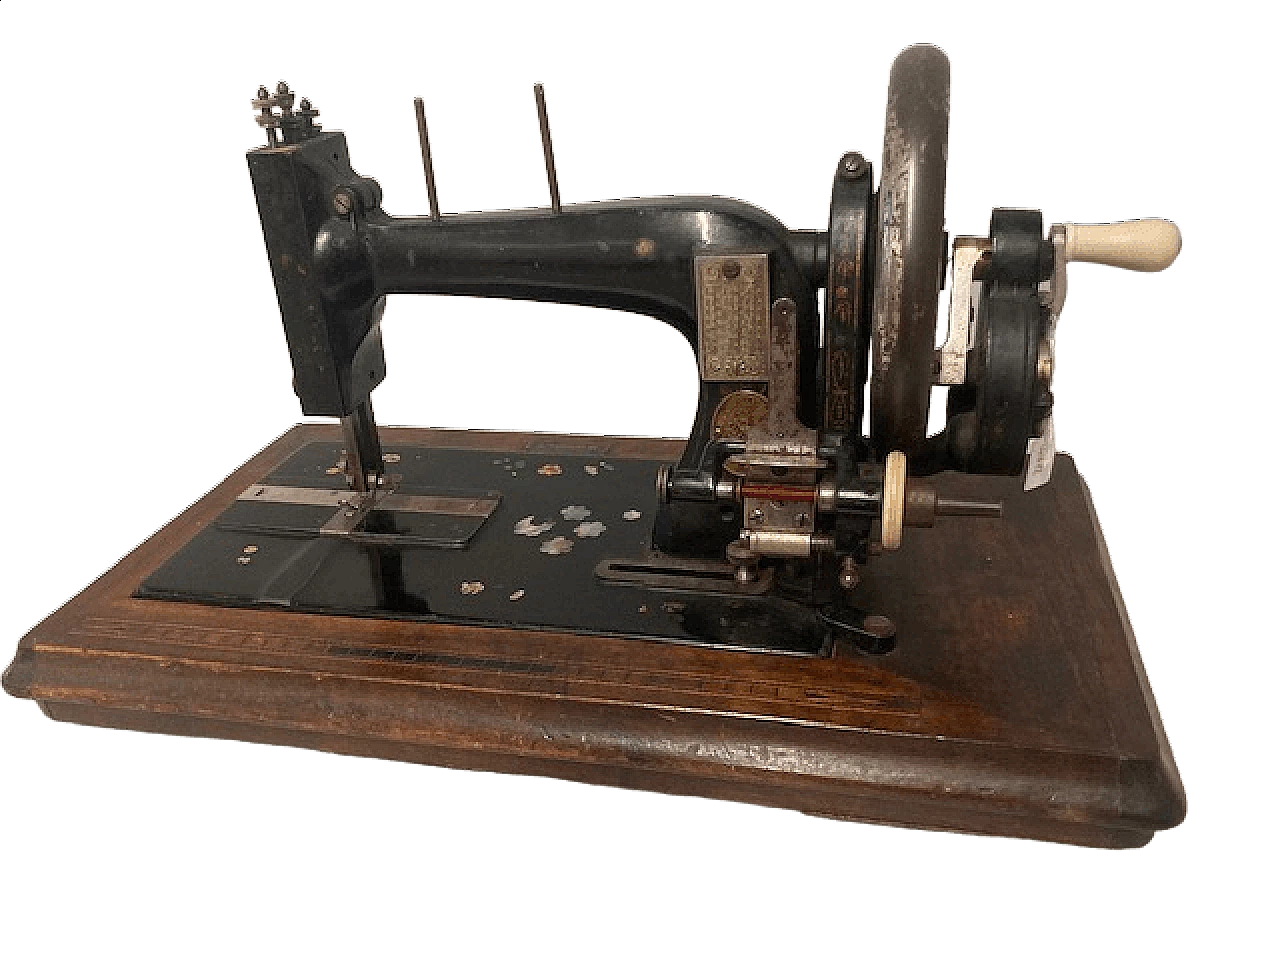 Tabletop sewing machine with mother-of-pearl inlays, late 19th century 17